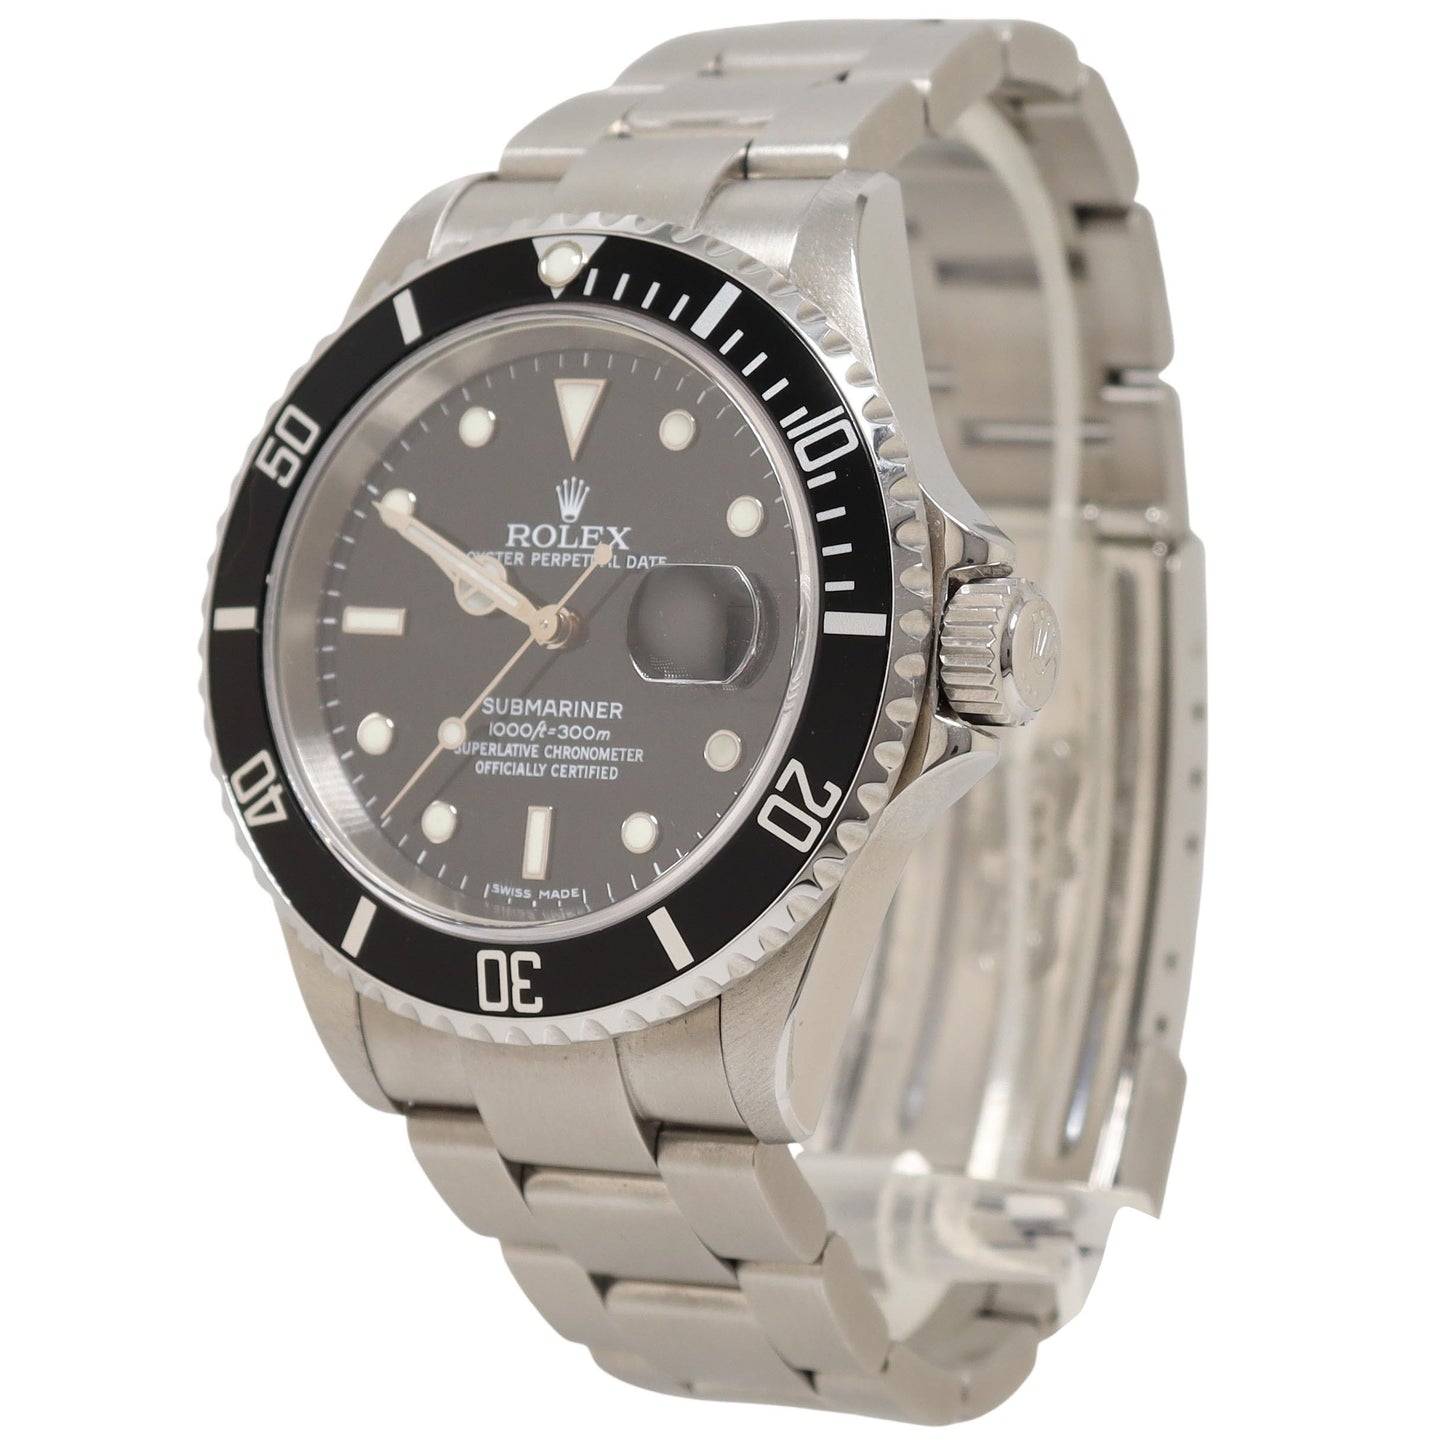 Rolex Men's Submariner Date Stainless Steel 40mm Black Dot Dial Watch Reference#: 16610 - Happy Jewelers Fine Jewelry Lifetime Warranty